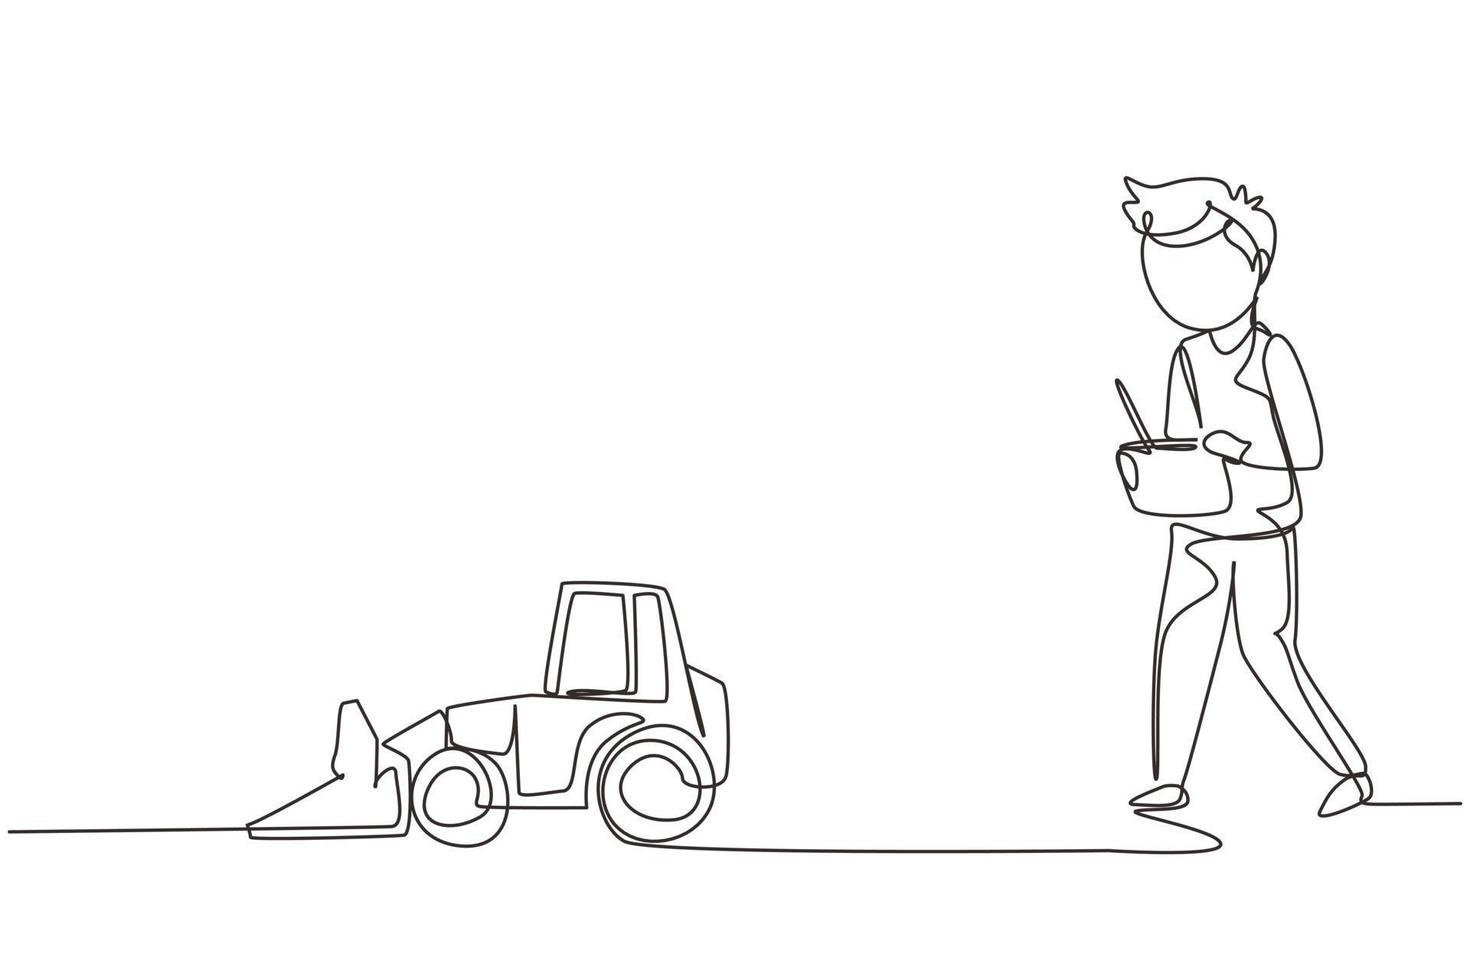 Single one line drawing boy playing with remote-controlled bulldozer toy. Kids playing with electronic toy bulldozer with remote control in hands. Continuous line design graphic vector illustration